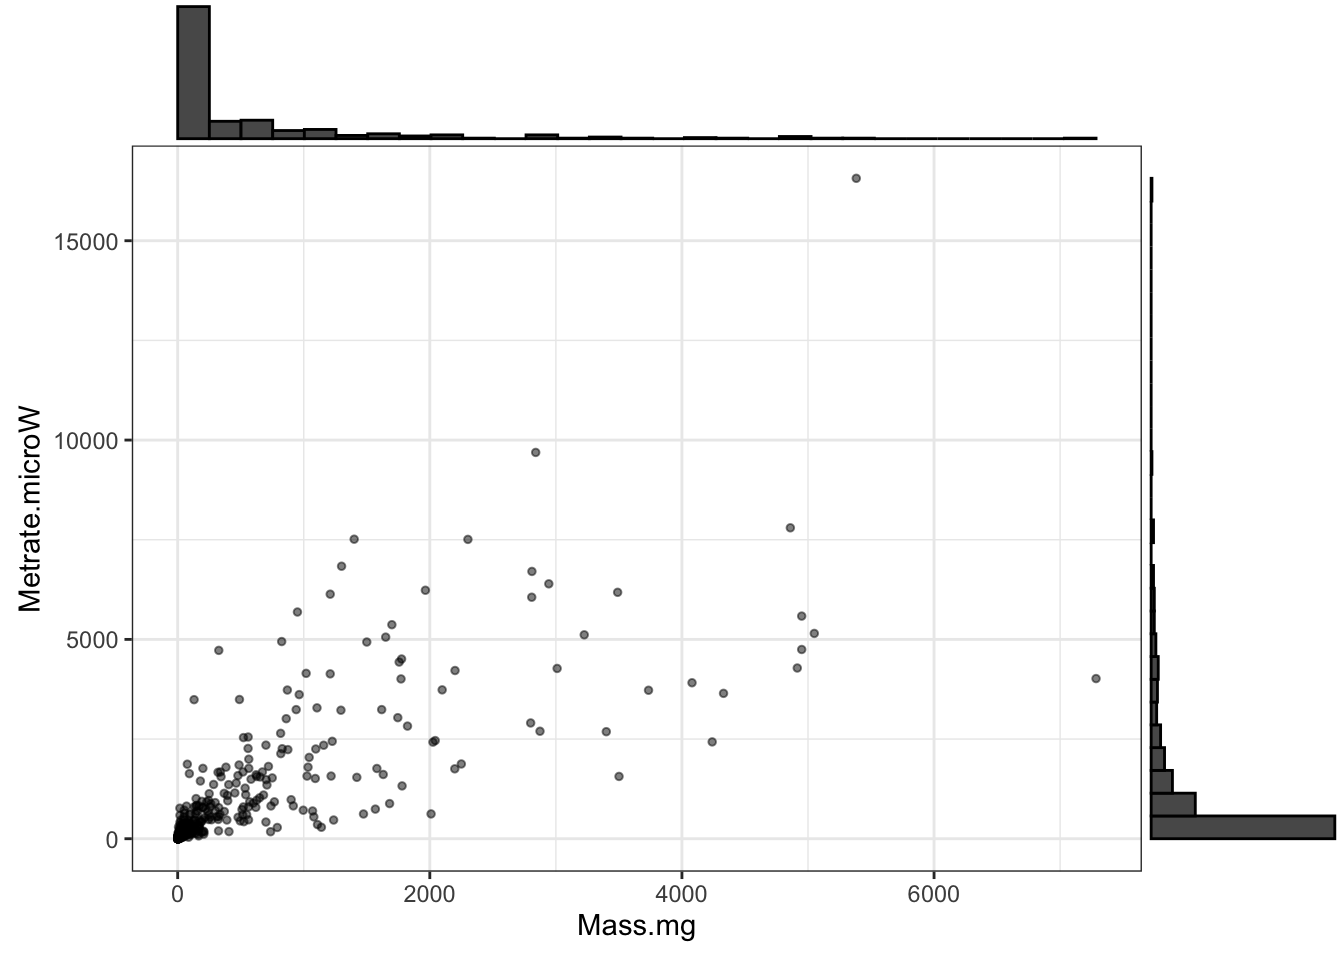 Insect metabolic rates vs. mass; note the extremely skewed data distributions on both axes